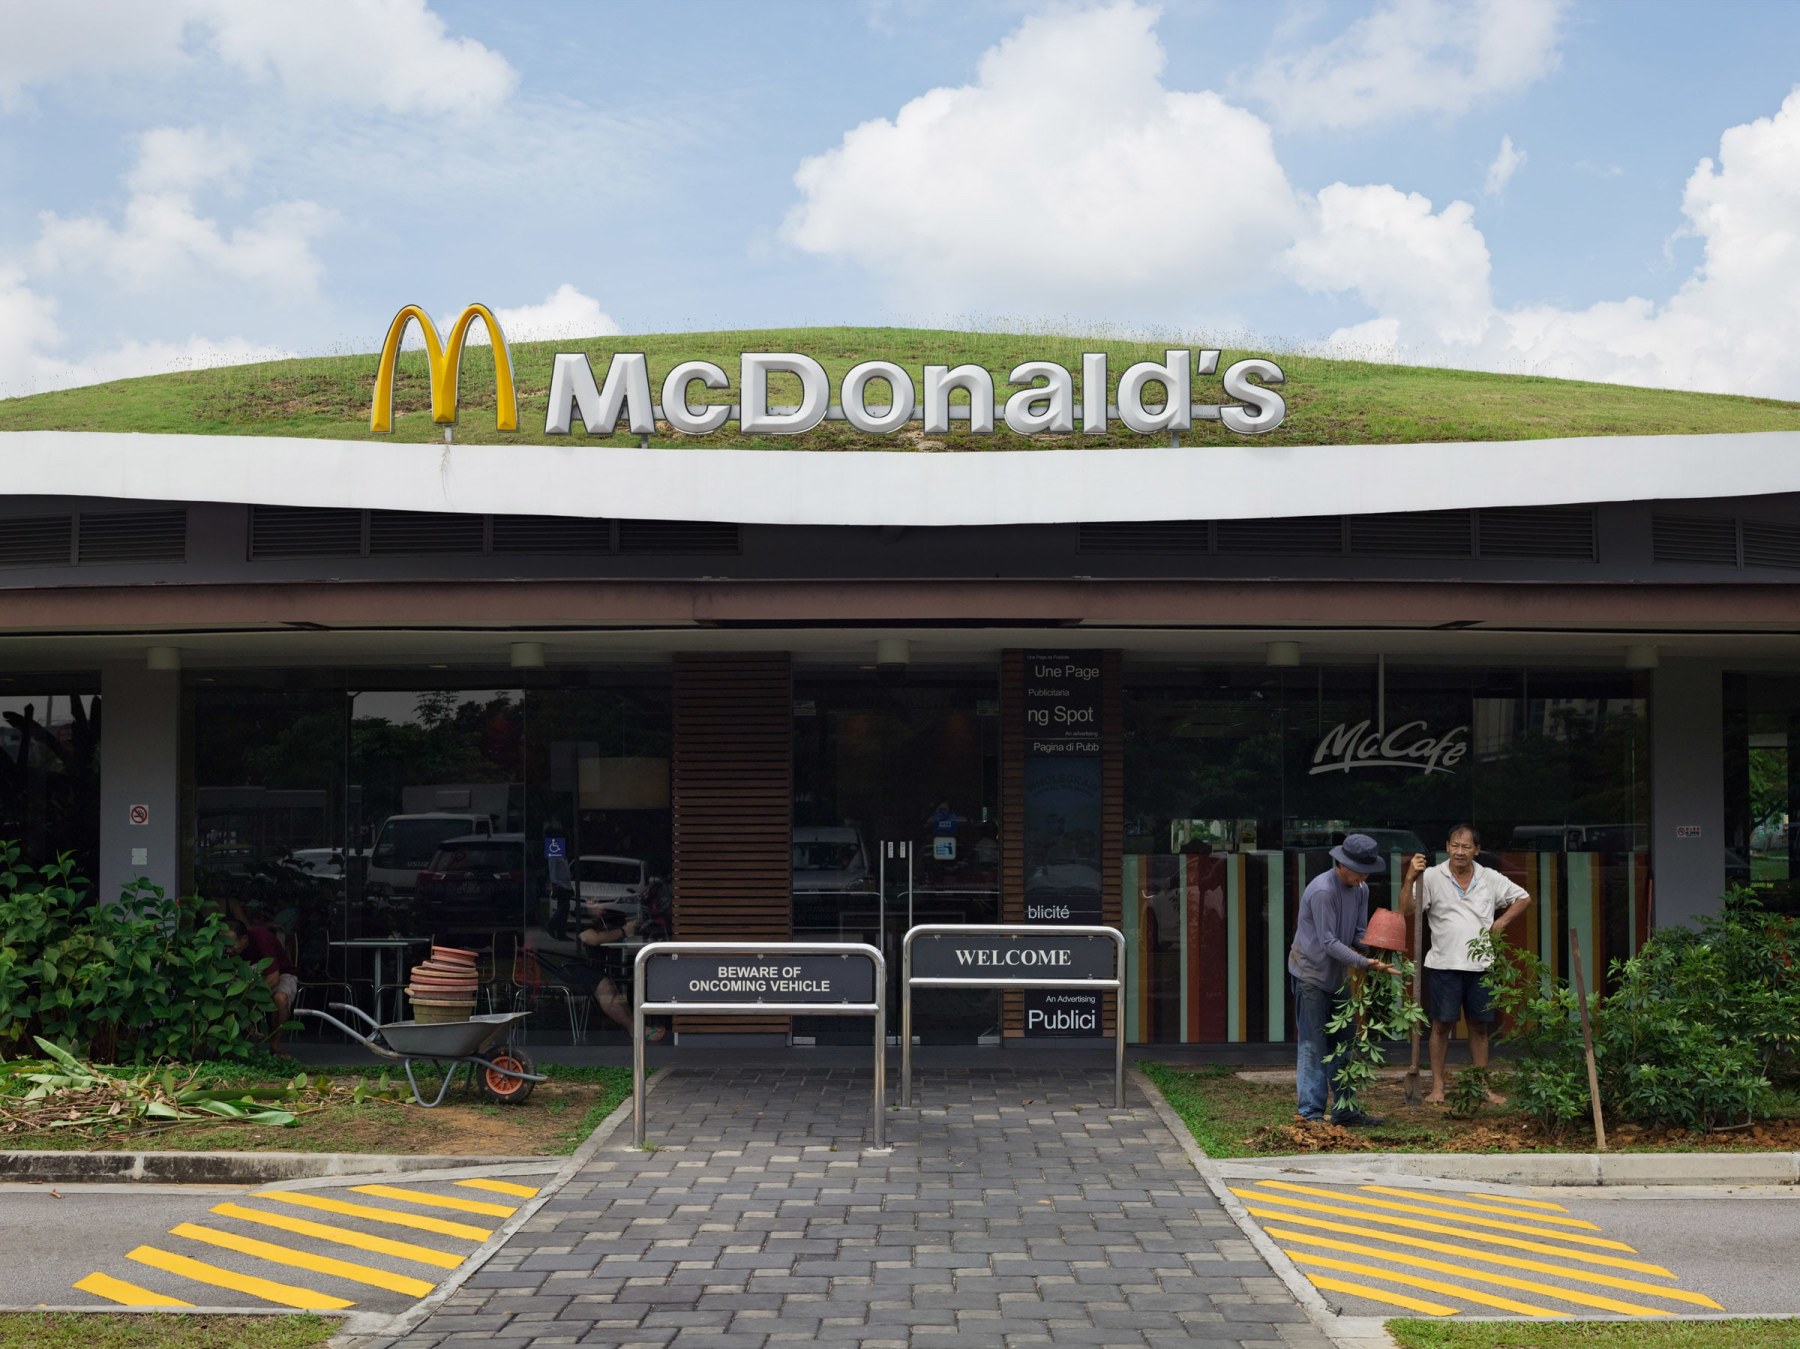 LUCAS FOGLIALow and Ng Landscaping the First McDonald&#039;s with a Green Roof, Singapore, 2014Pigment Print34 x 44 inchesEdition of 8